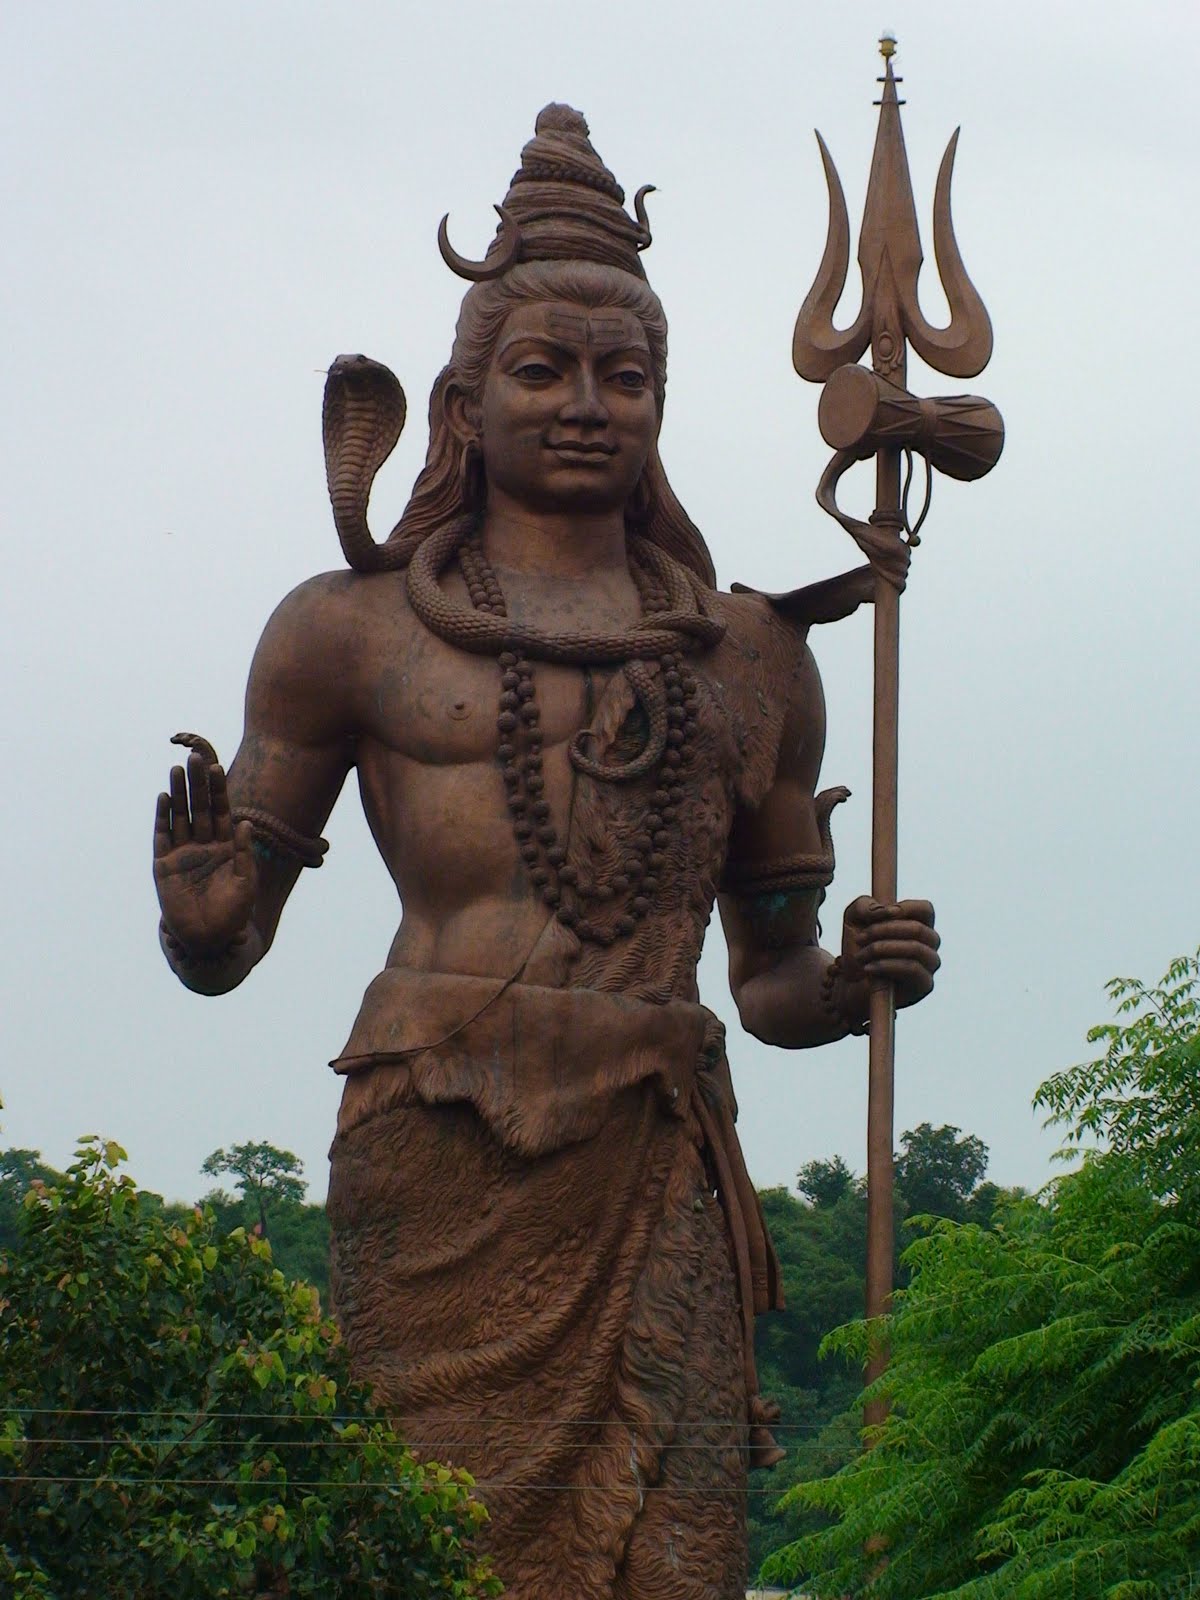 Searching Shiva The Destroyer